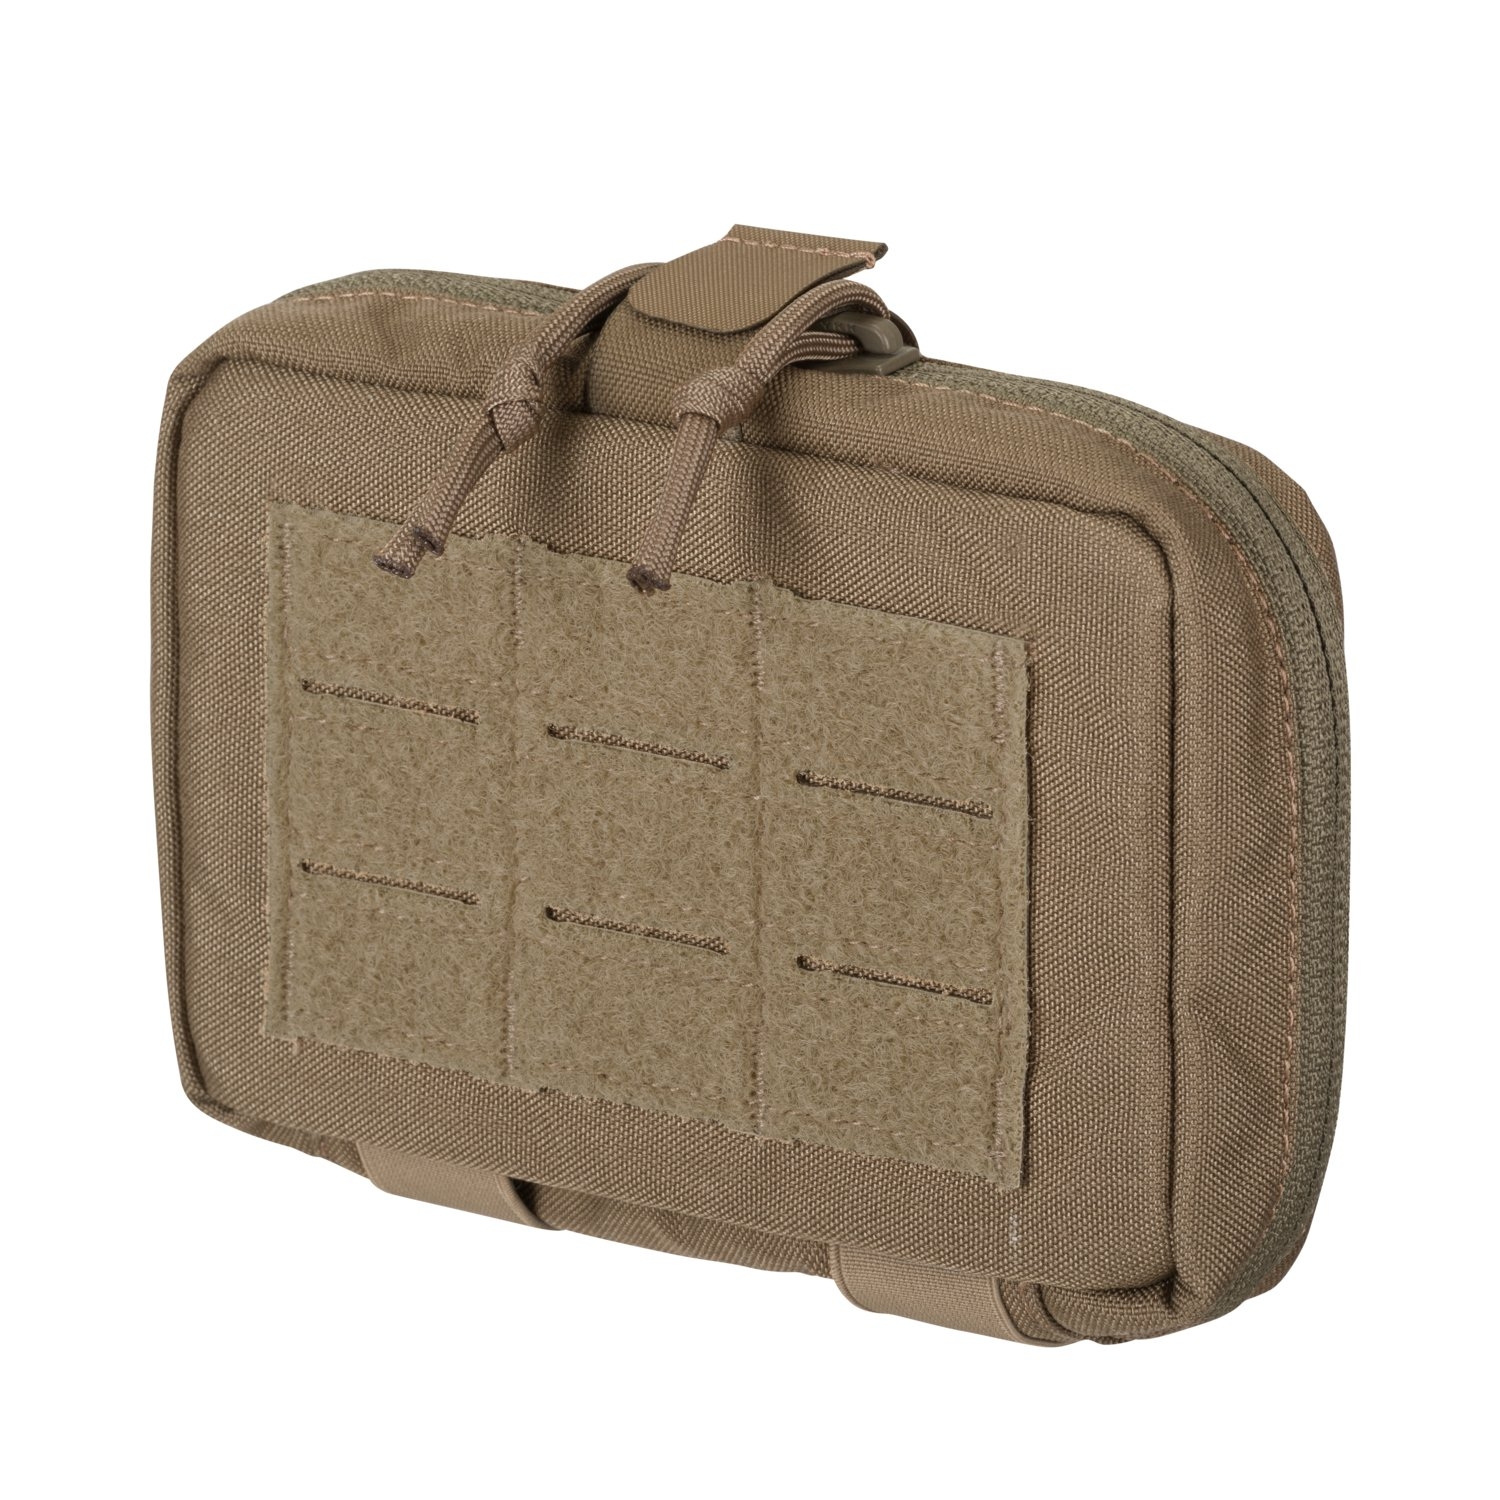 Image of Organizer JTAC DIRECT ACTION Admin Pouch - Cordura - Coyote Brown - One Size (PO-JTAC-CD5-CBR)